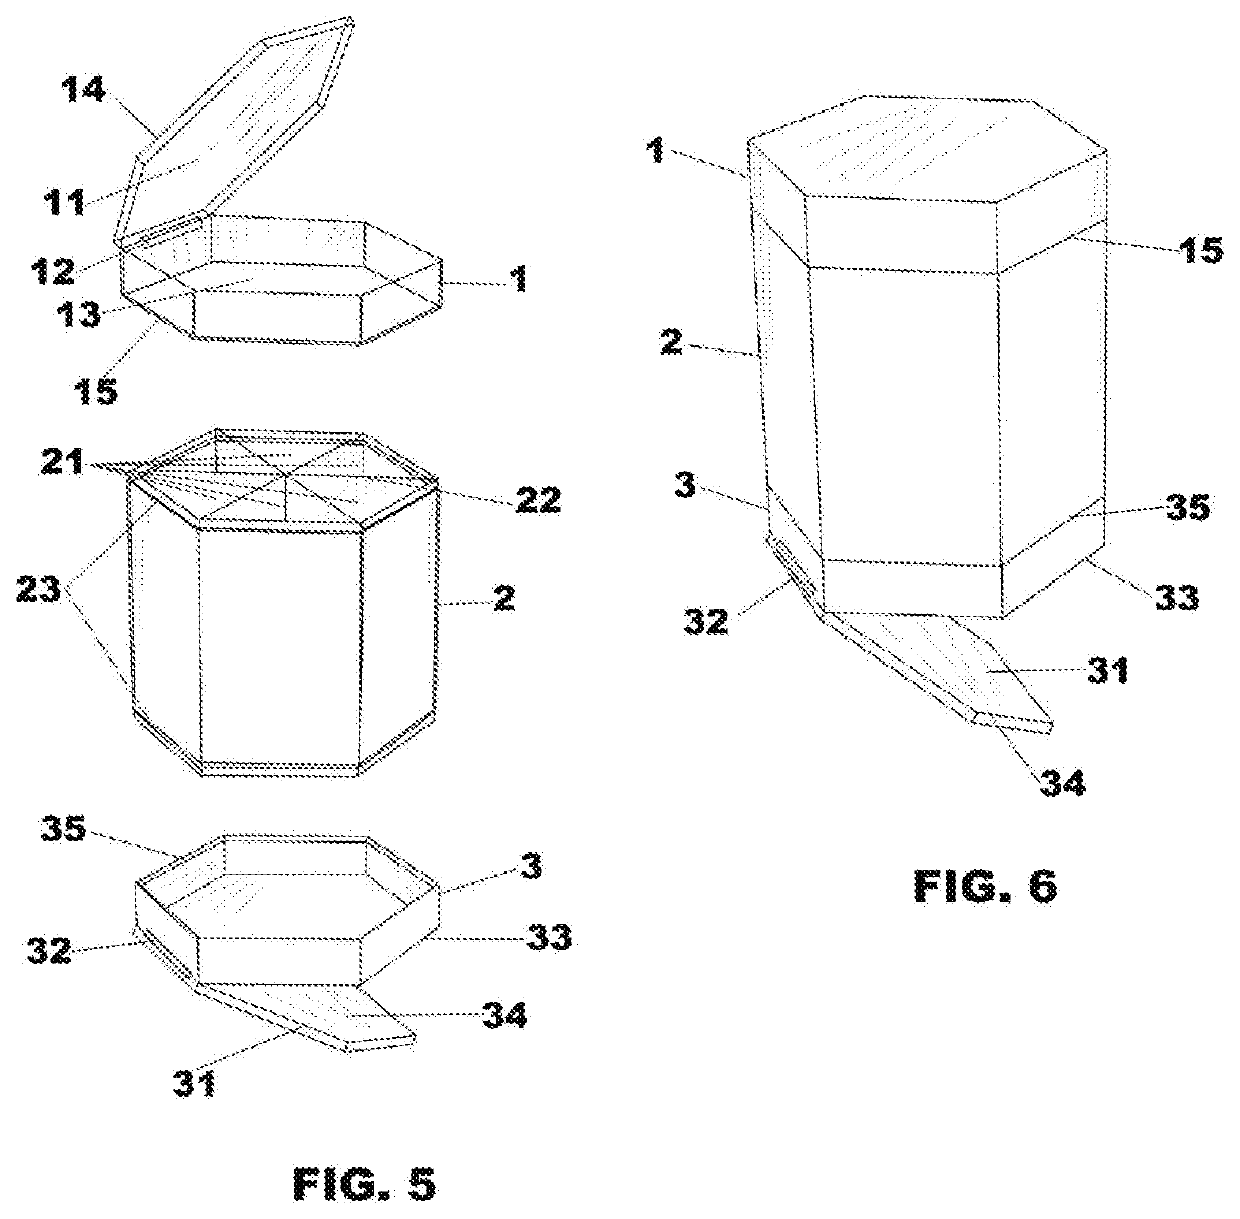 Multi-layer multi-compartment cosmetic and personal items container for holding both flat and tall items